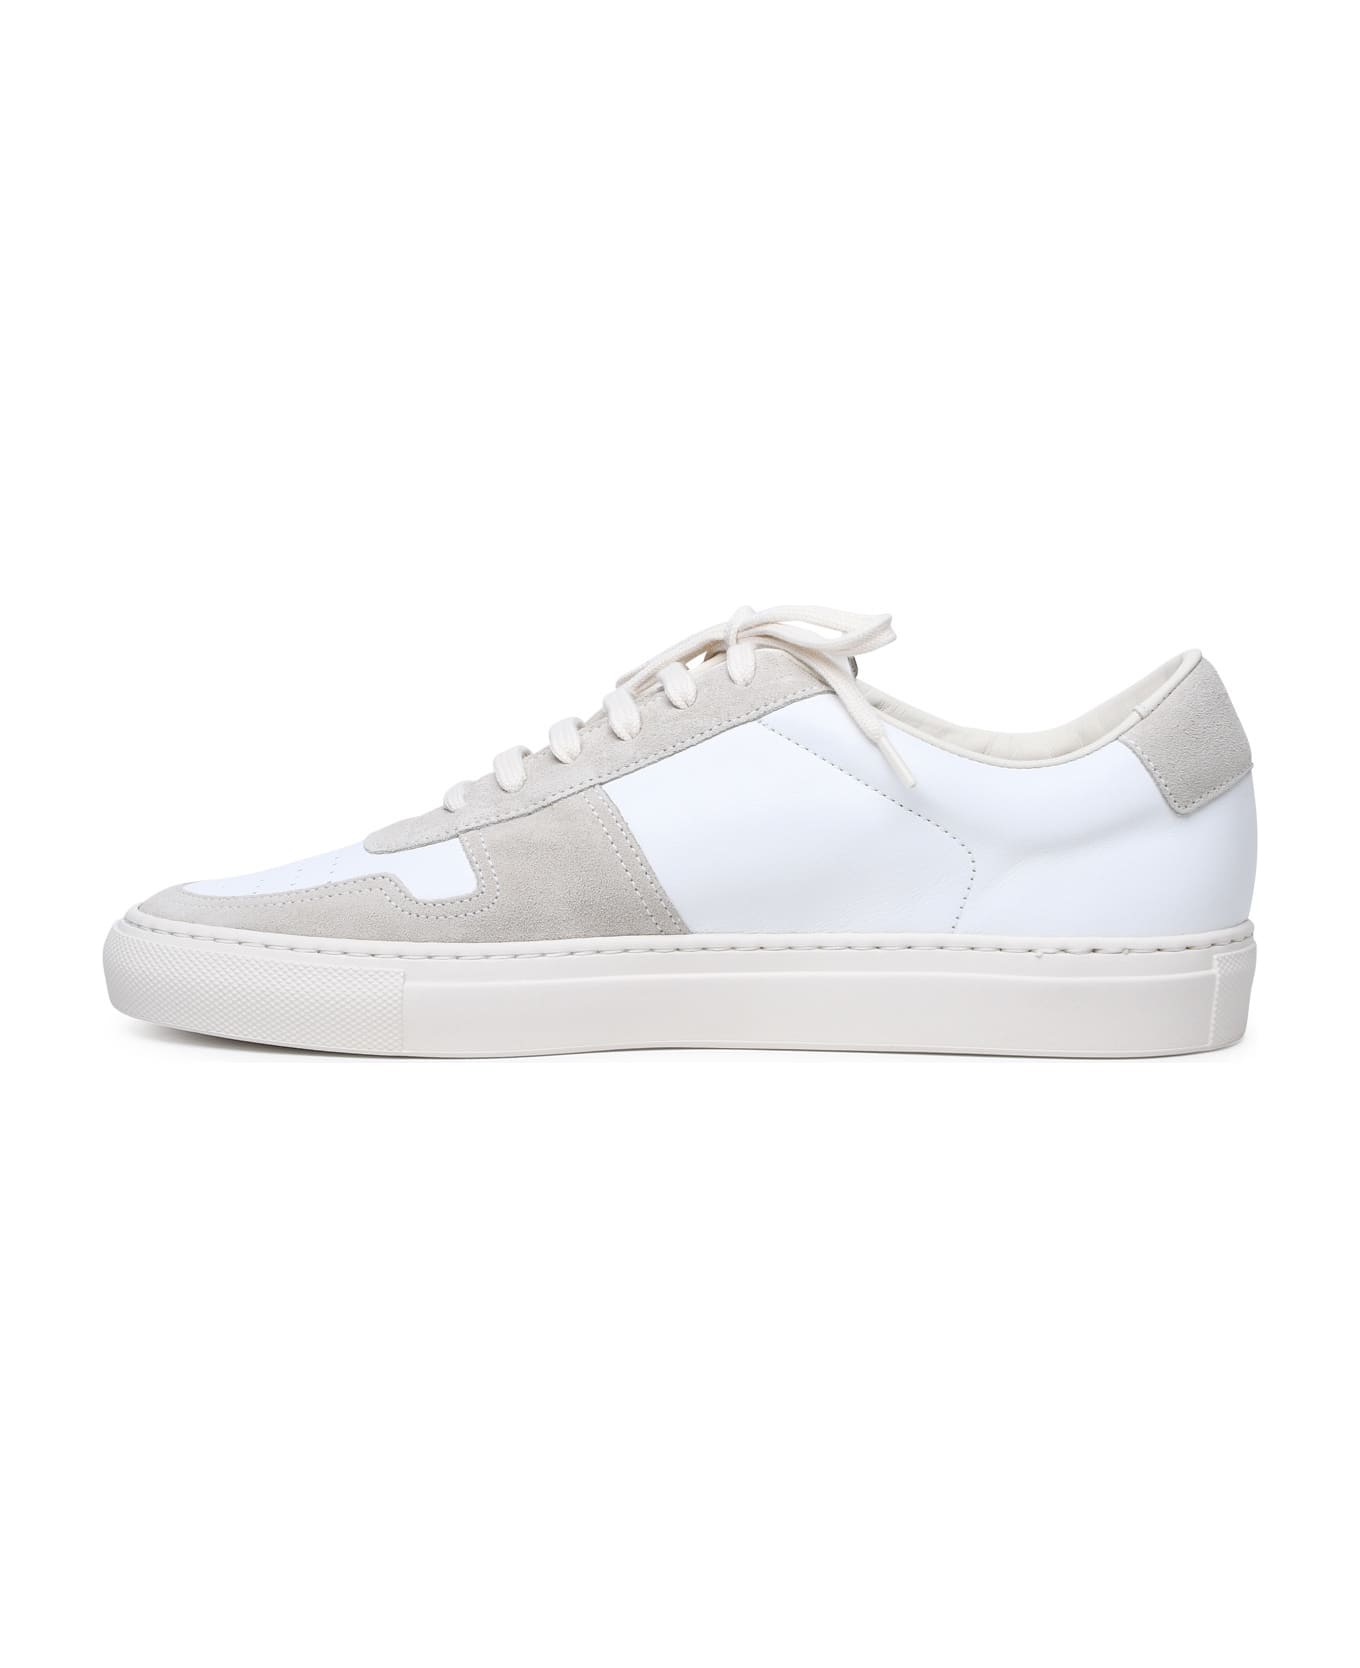 Common Projects Bball Duo Sneakers - White